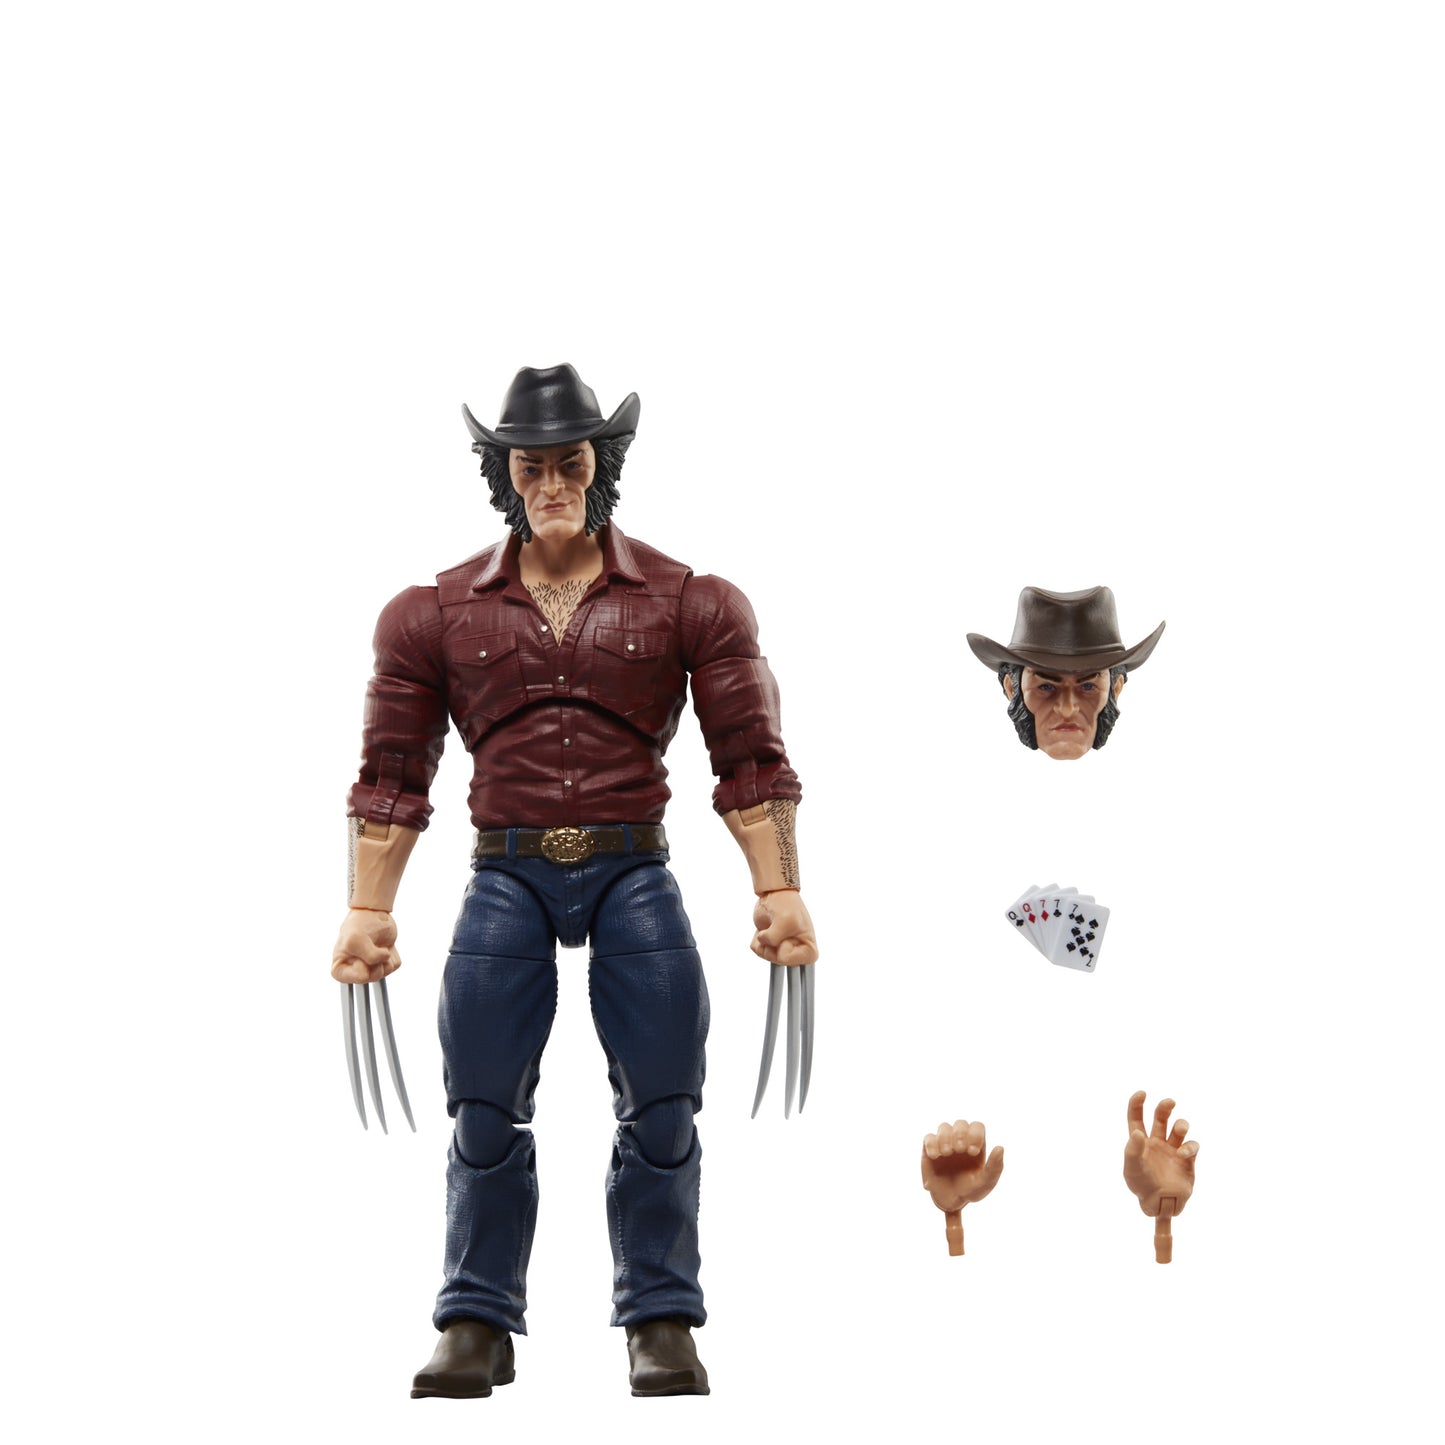 (PRE-ORDER) Marvel Legends - 50th Anniversary Wolverine vs Sabertooth - 6 inch Action Figures 2 Pack